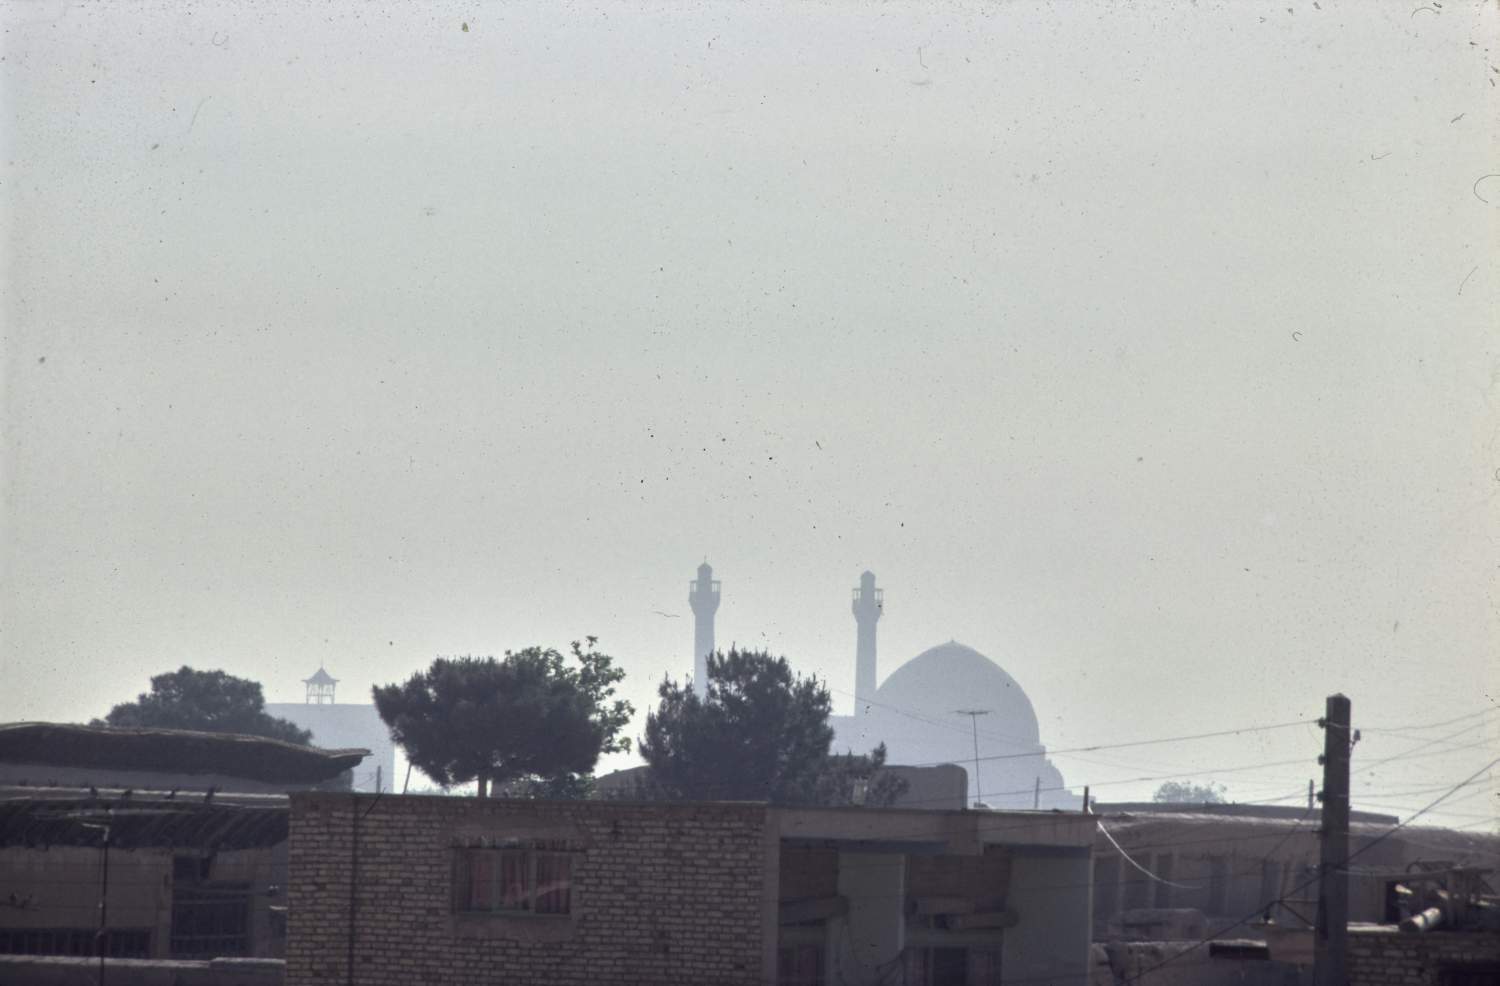 Distant view of dome and minarets from west over rooftops.